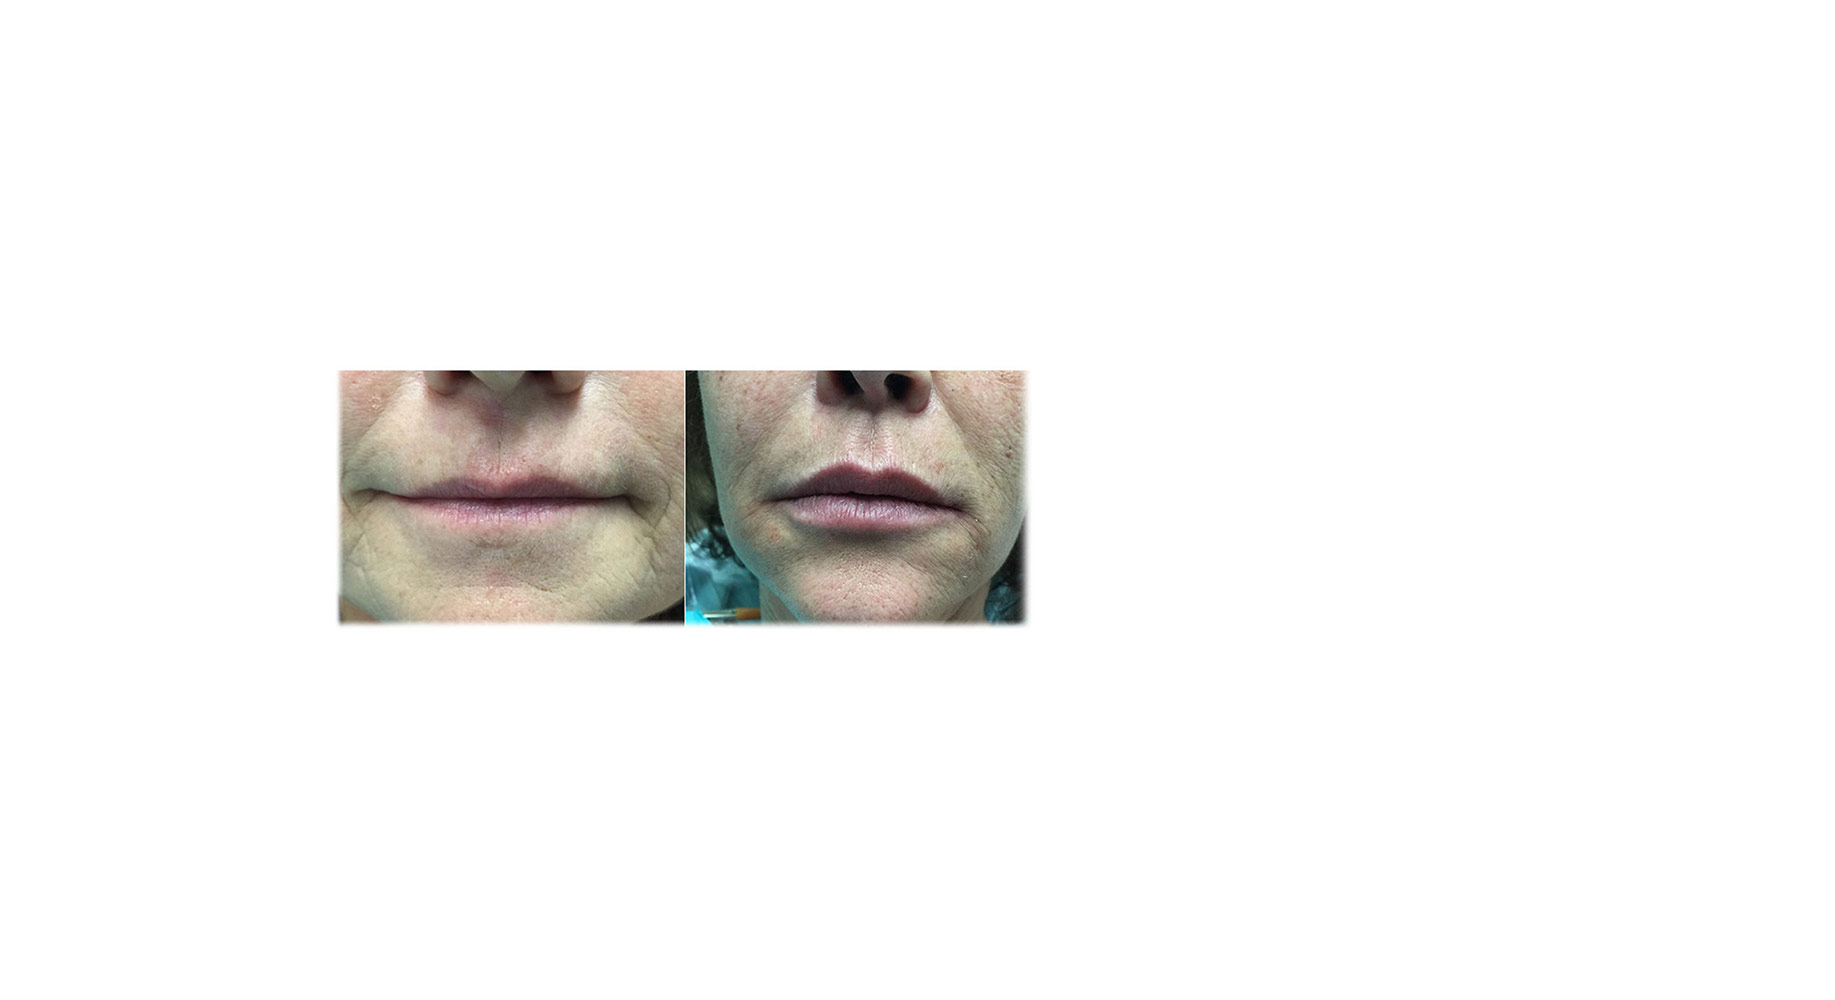 With Juvederm®, Dr DeLucia can give you fuller lips